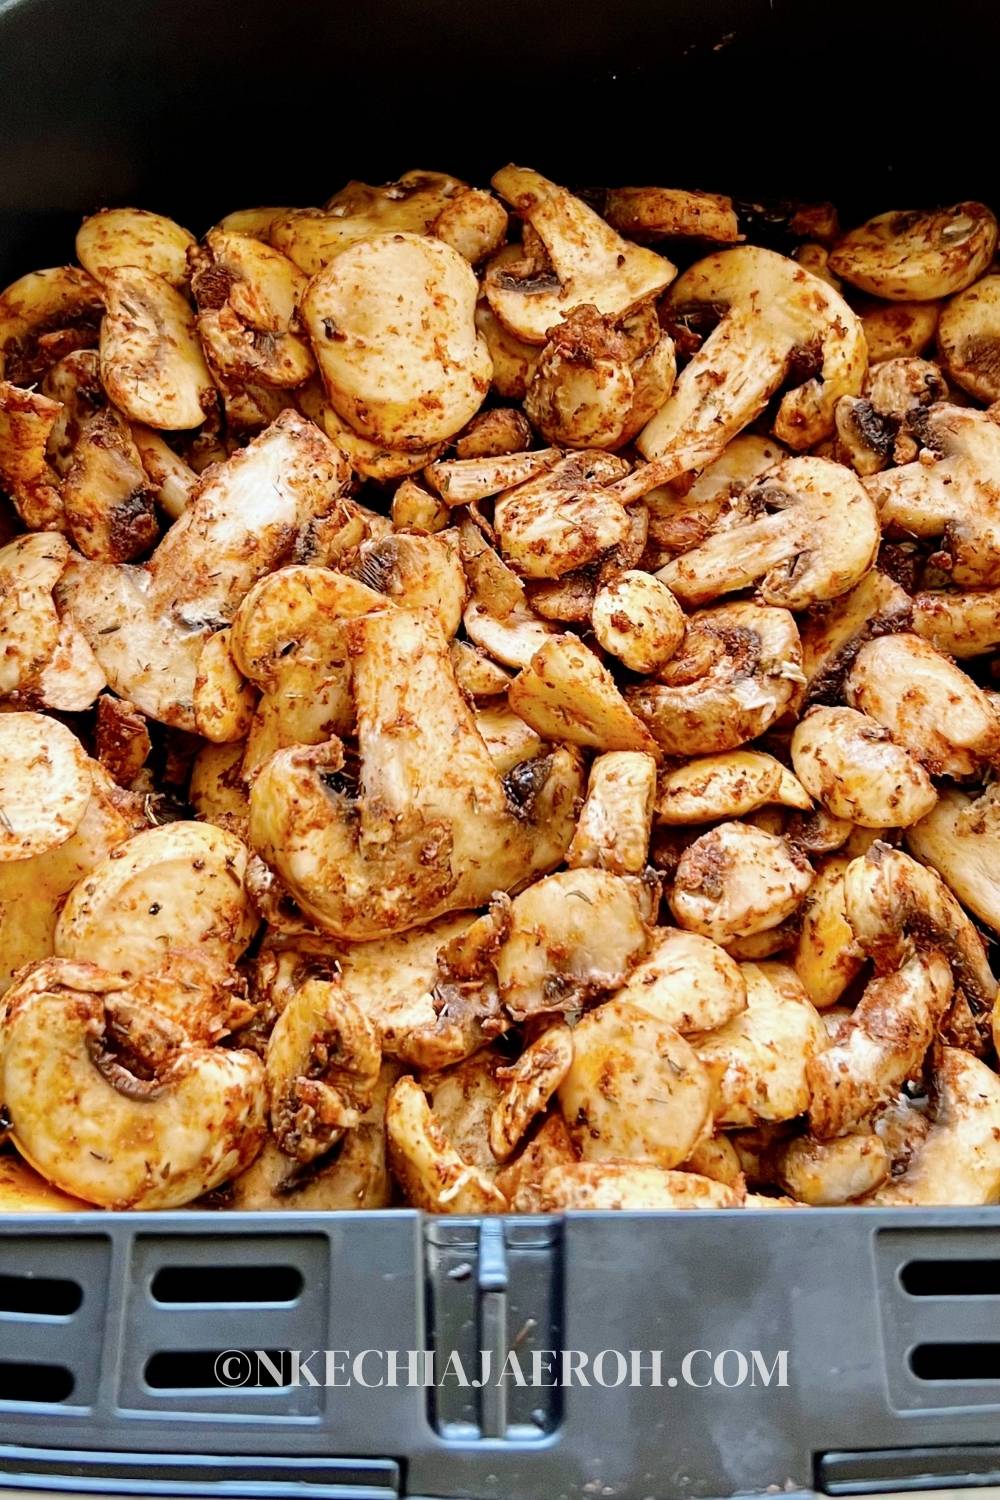 A simple recipe of air fryer mushrooms requires sliced mushrooms, paprika, olive oil, onion powder, garlic powder, dry thyme, salt, and pepper! Making mushrooms in your air fryer is the easiest way to make mushrooms. It takes only a few minutes, resulting in the best tasting mushroom ever! You can add sliced air-fried mushrooms to salads and bowls or use them as appetizers or snacks. This easy salt and pepper air fryer mushroom recipe with paprika is vegan and can replace meat/fish!